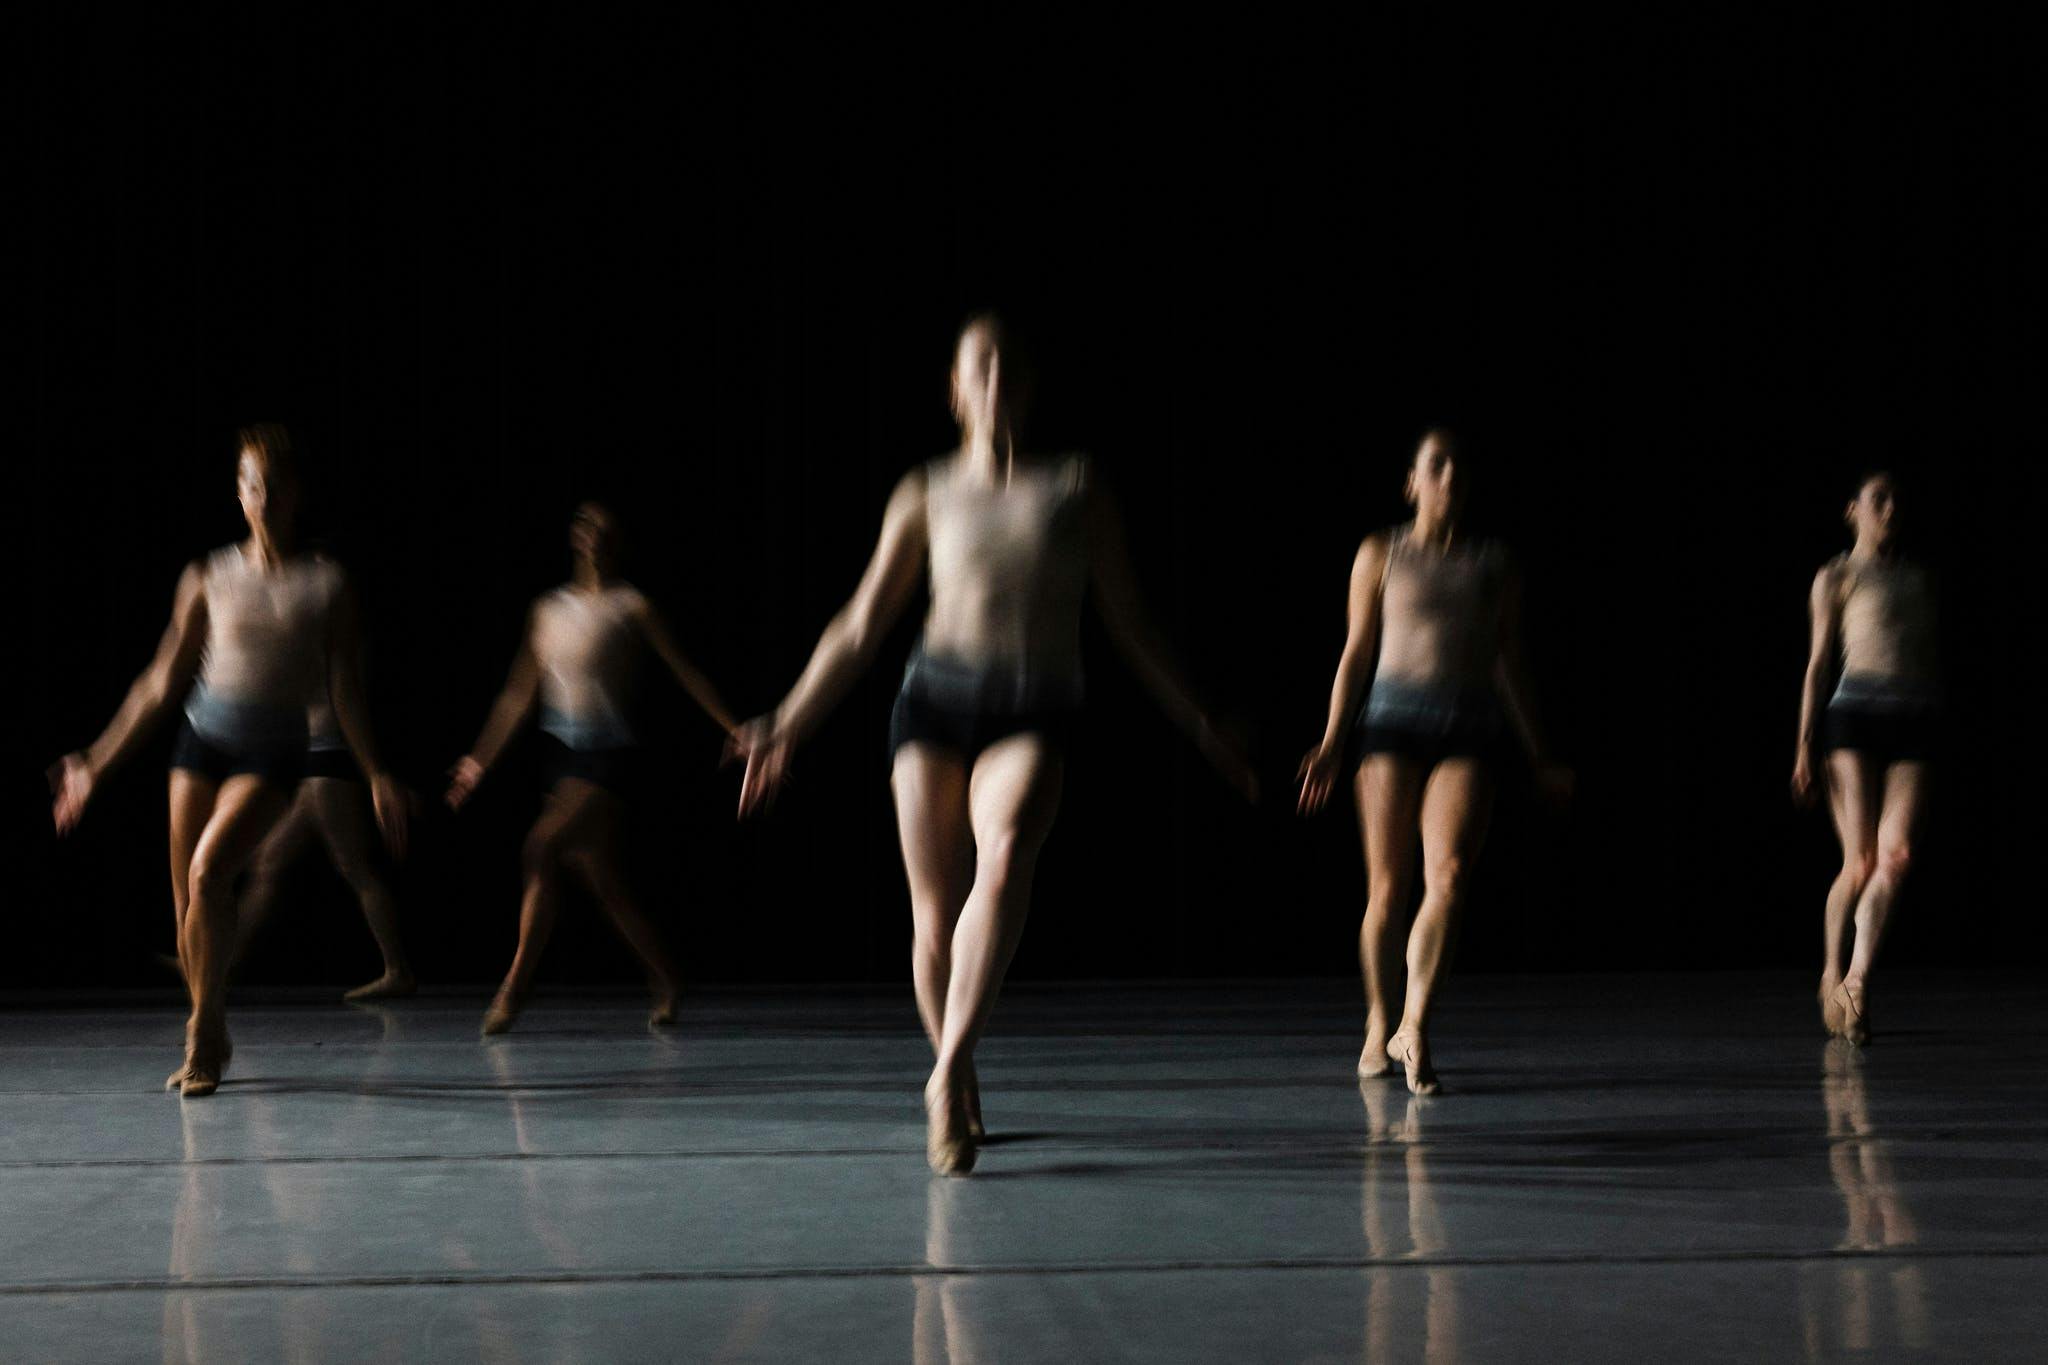 A group of dancers in a blurry image.